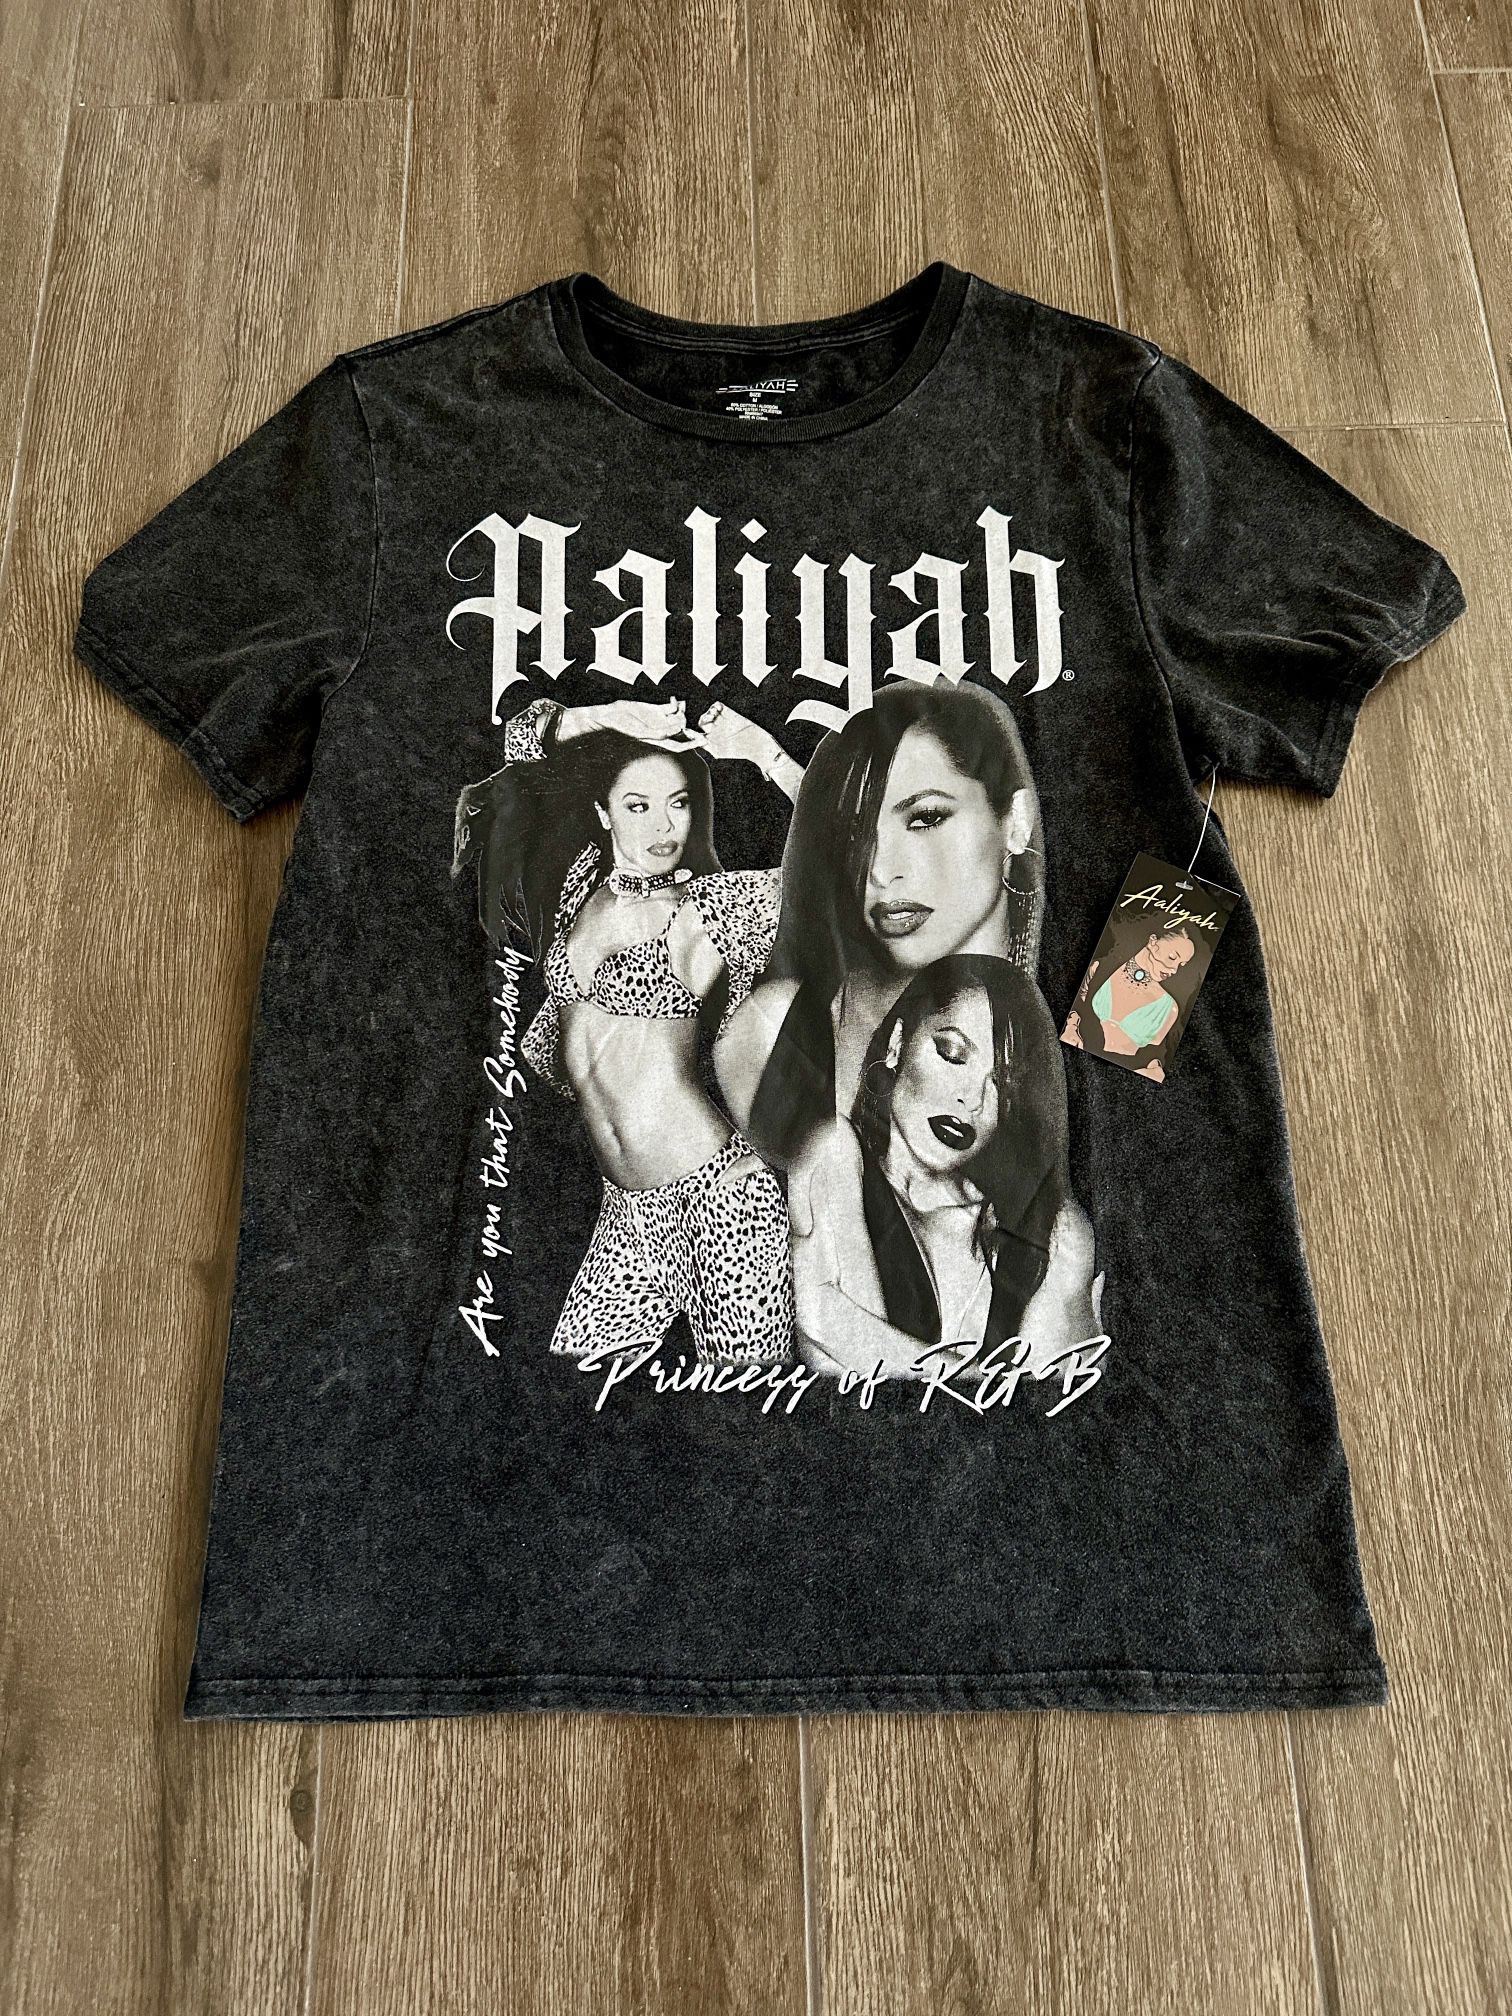 Aaliyah Forever Short Sleeve Acid Wash Tee Princess of R&B T Shirt size Med WMNS